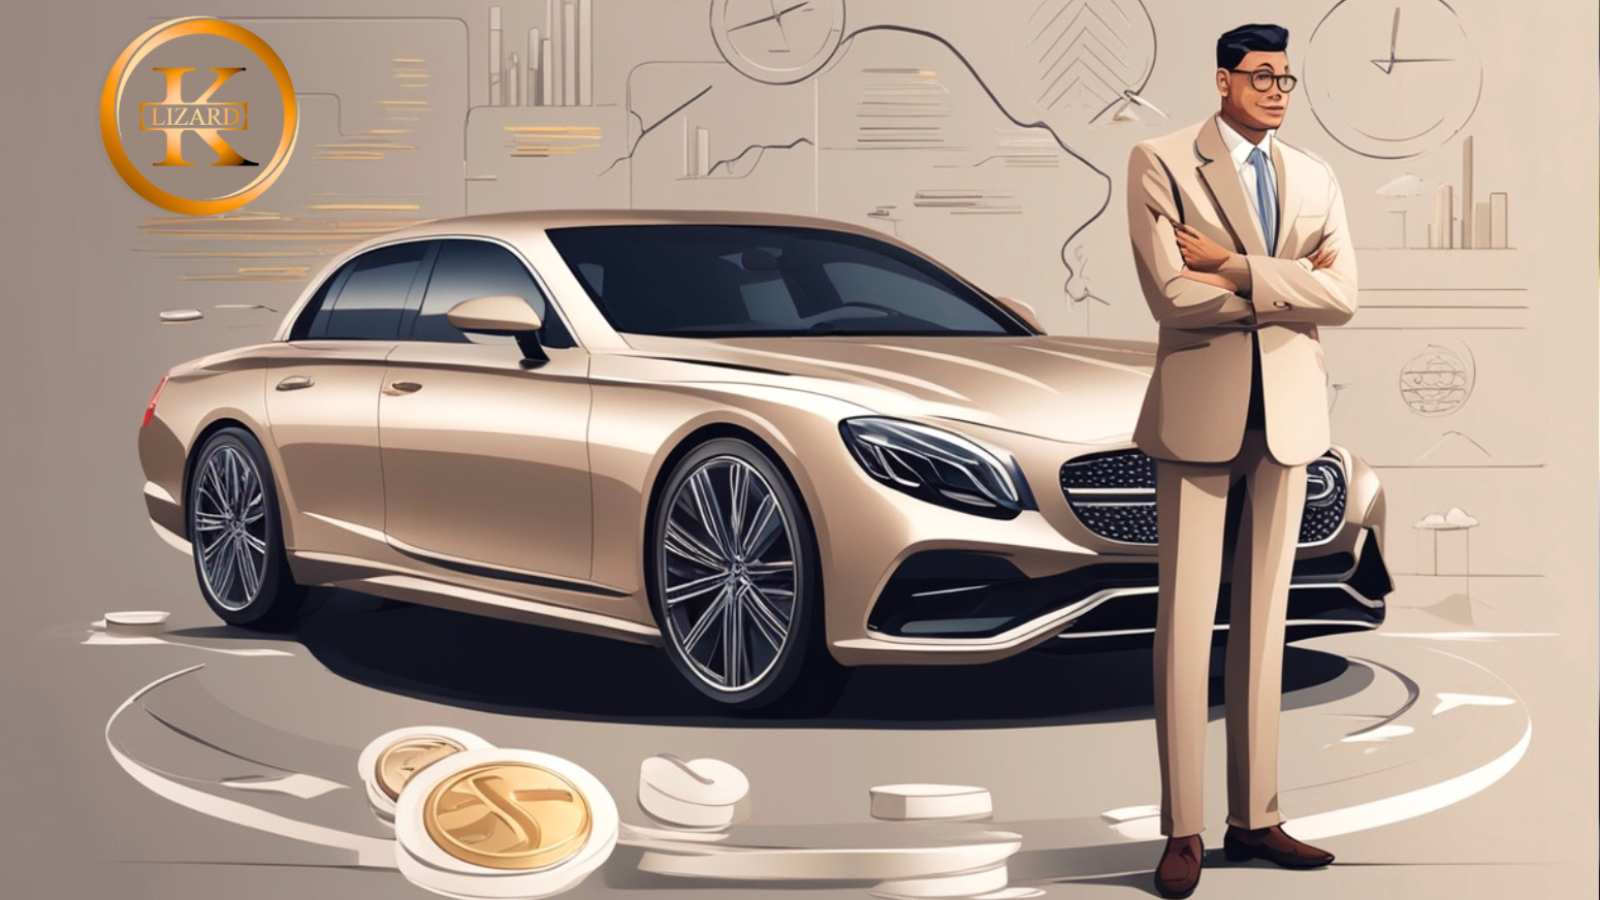 "Celebrate financial success: Smart investments pave the way to luxury rides."